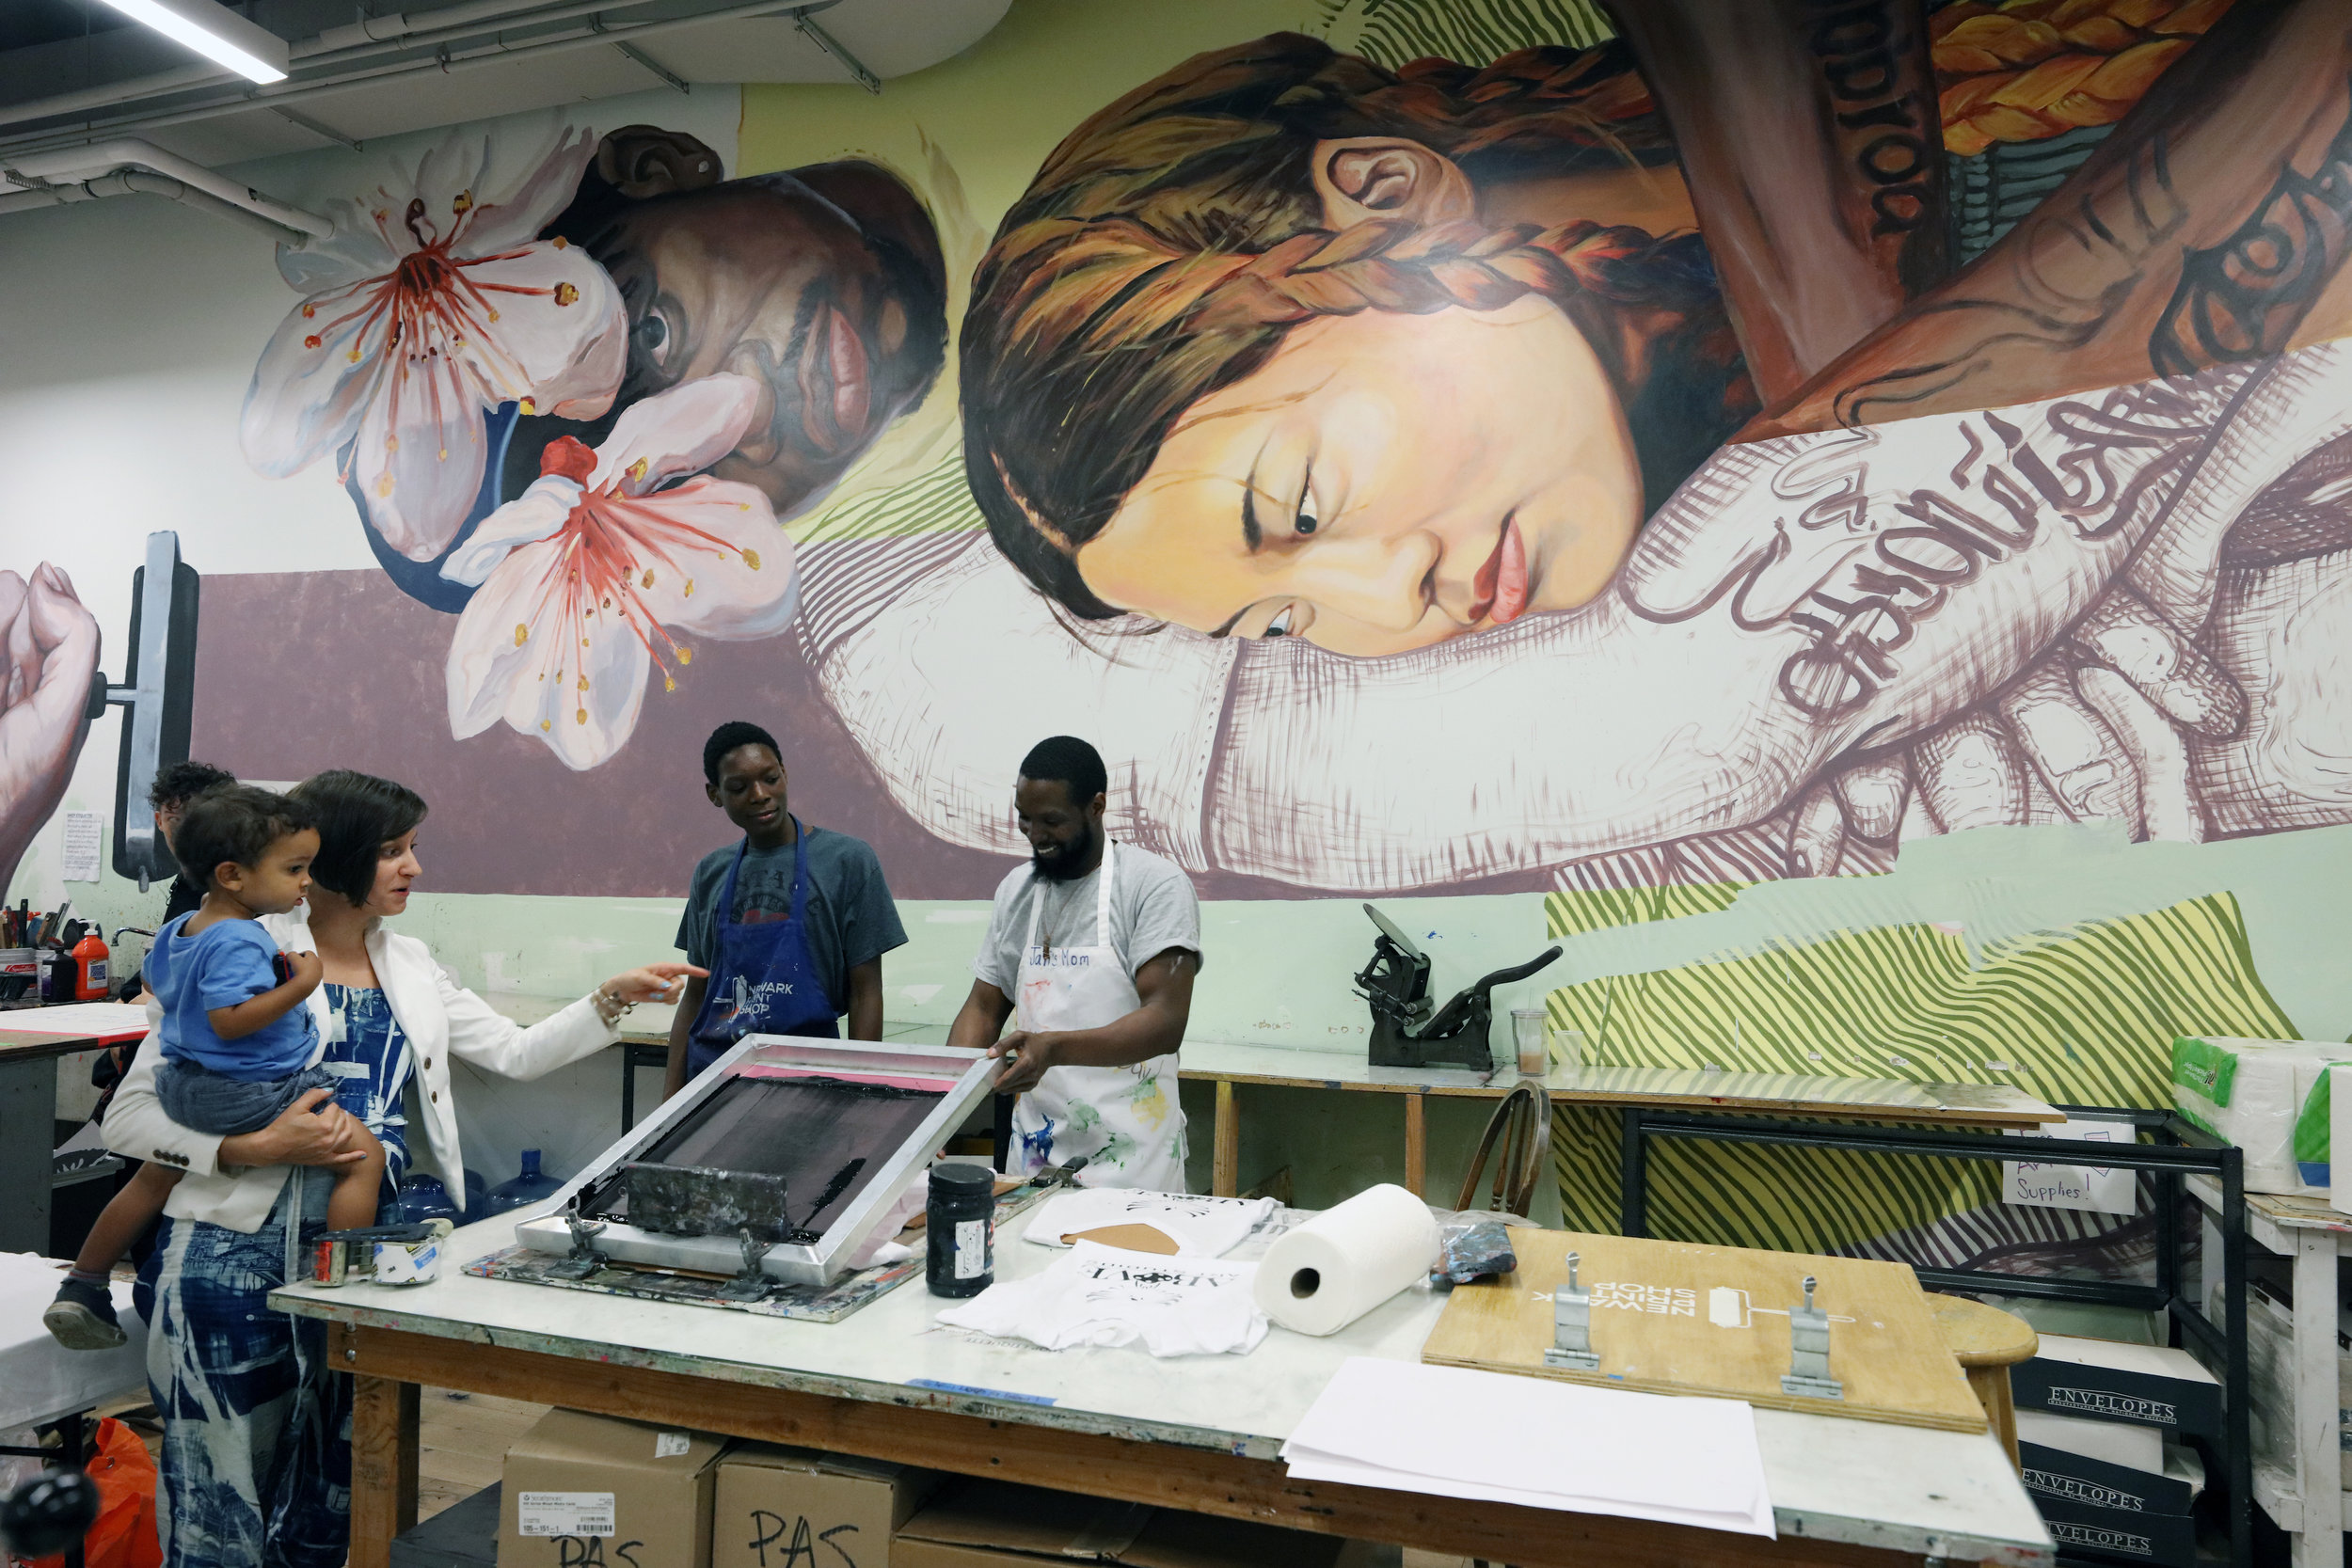 The Newark Print Shop’s Print Club is a weekly open studio for artists of all levels to come and make art together | Photo Credit: Anthony Alvarez